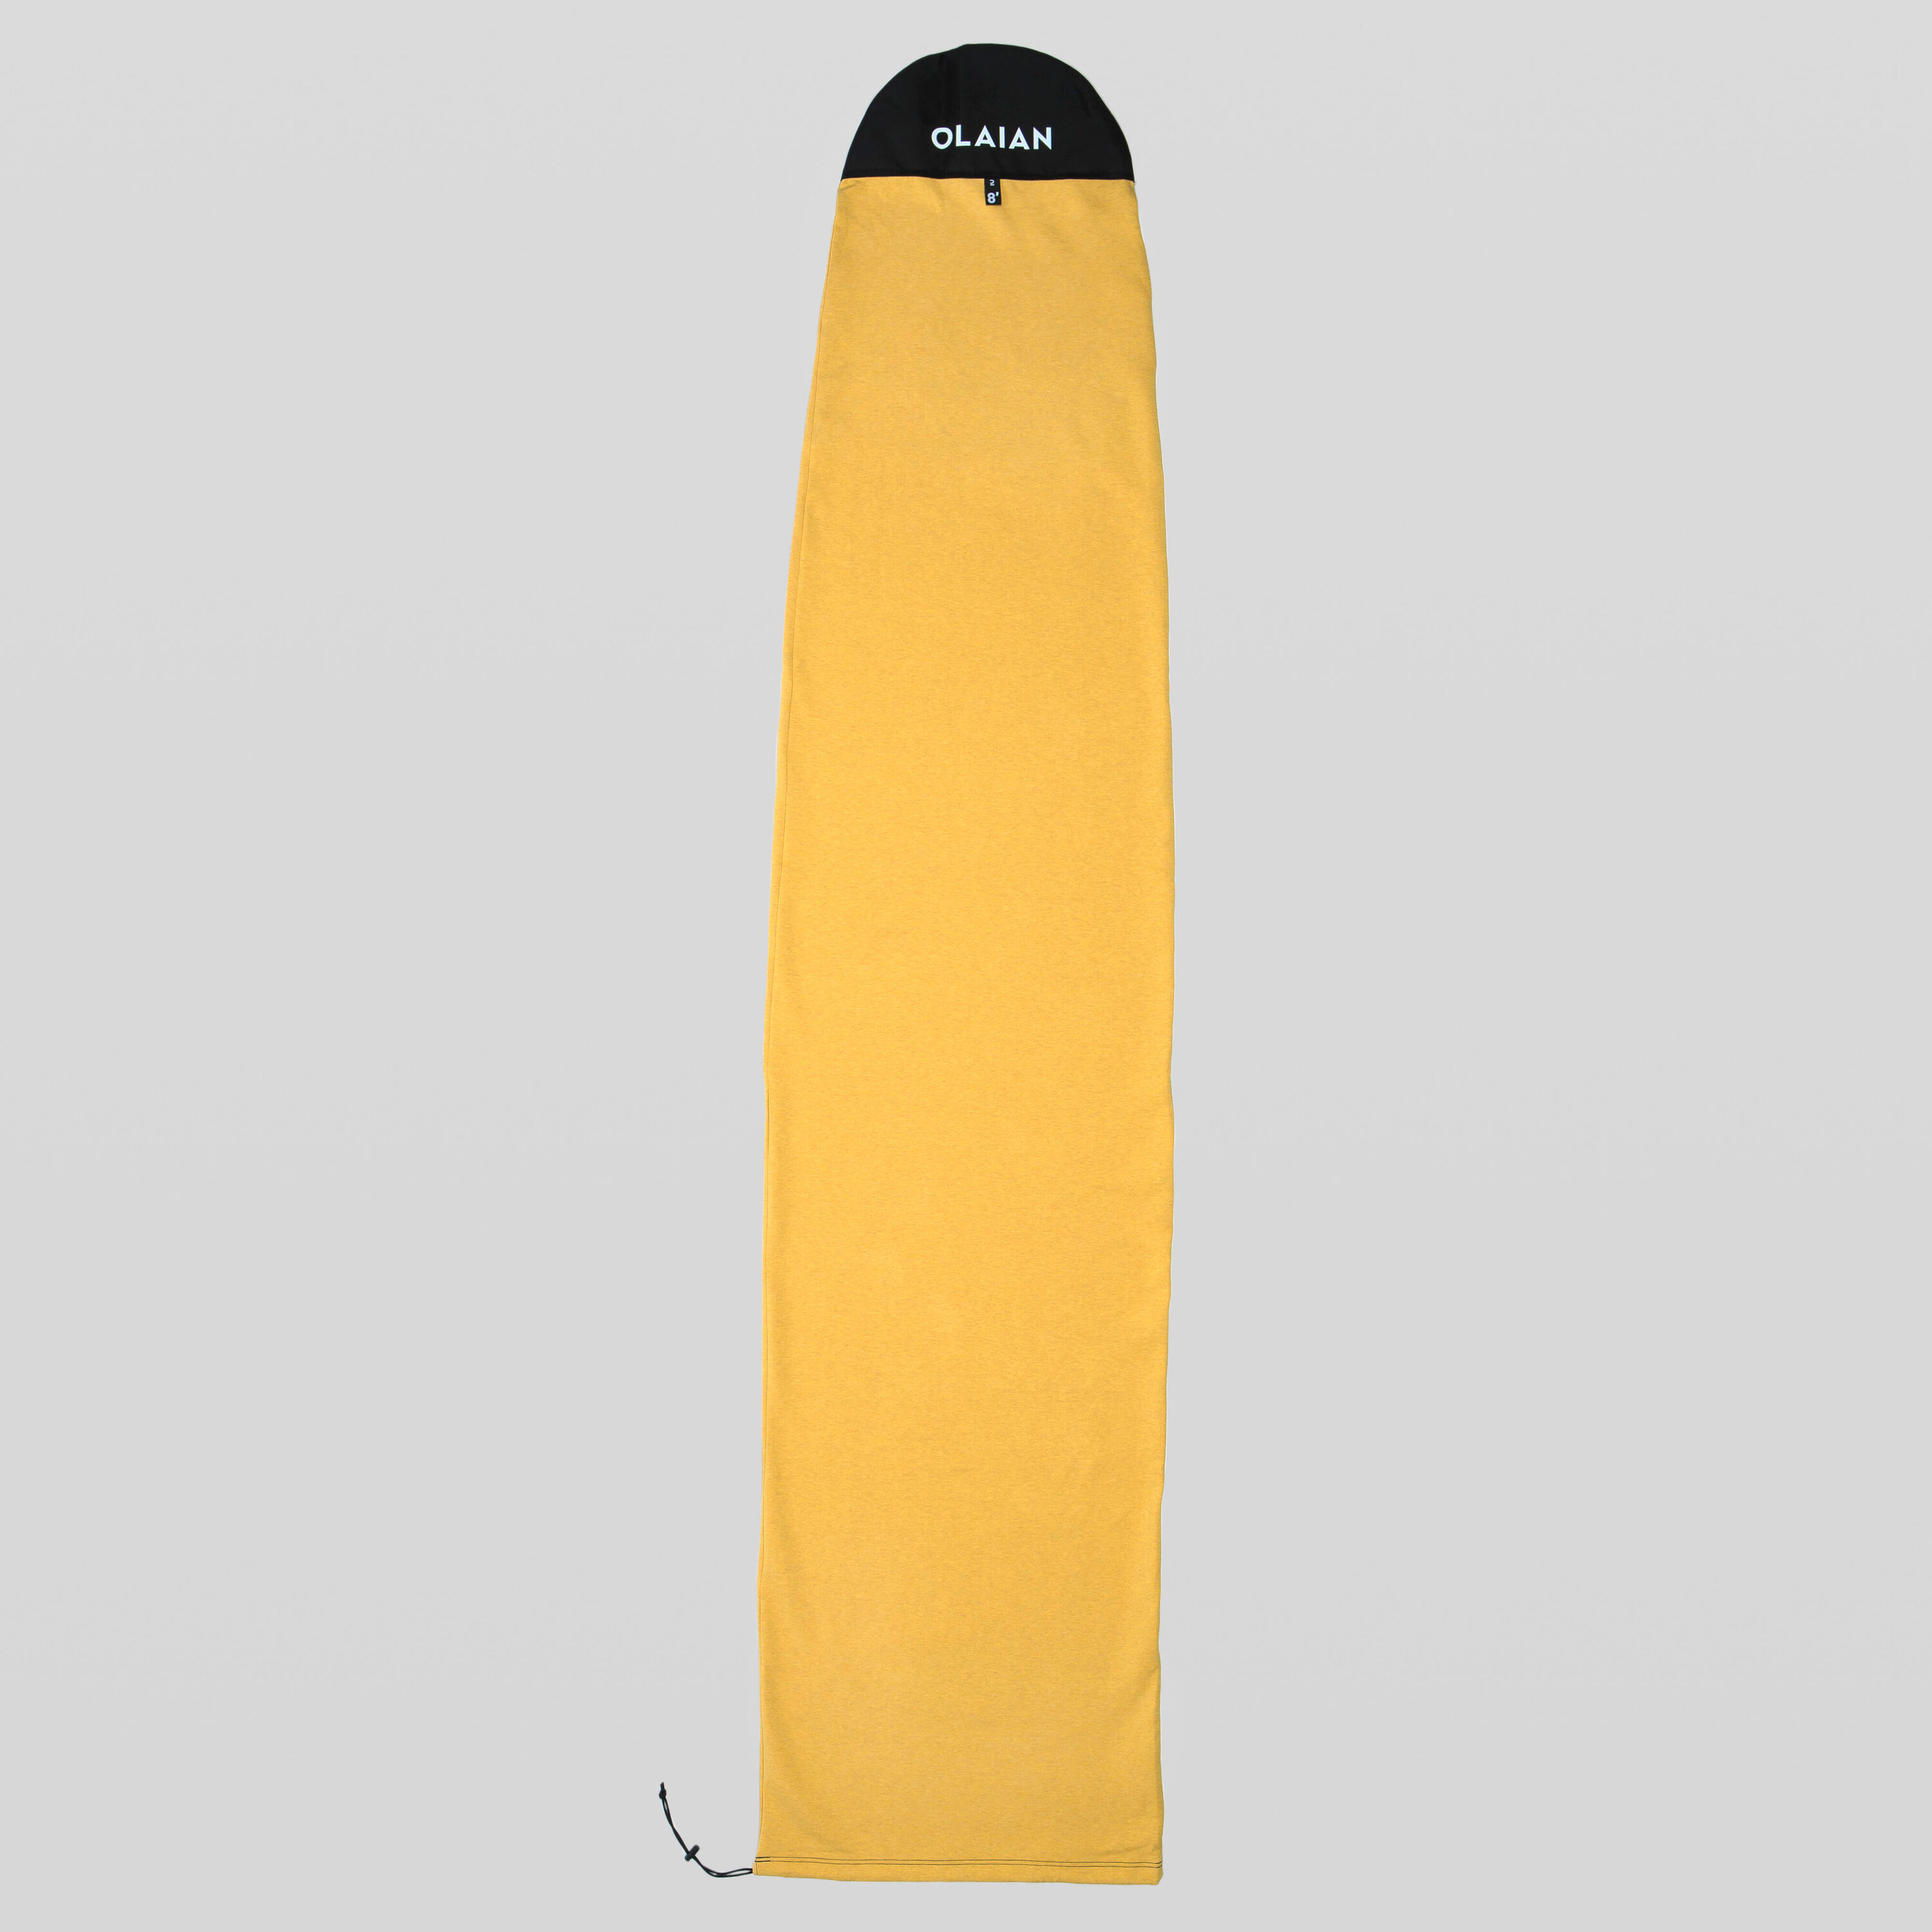 OLAIAN SURFING SOCK COVER for boards up to 8'2” max.